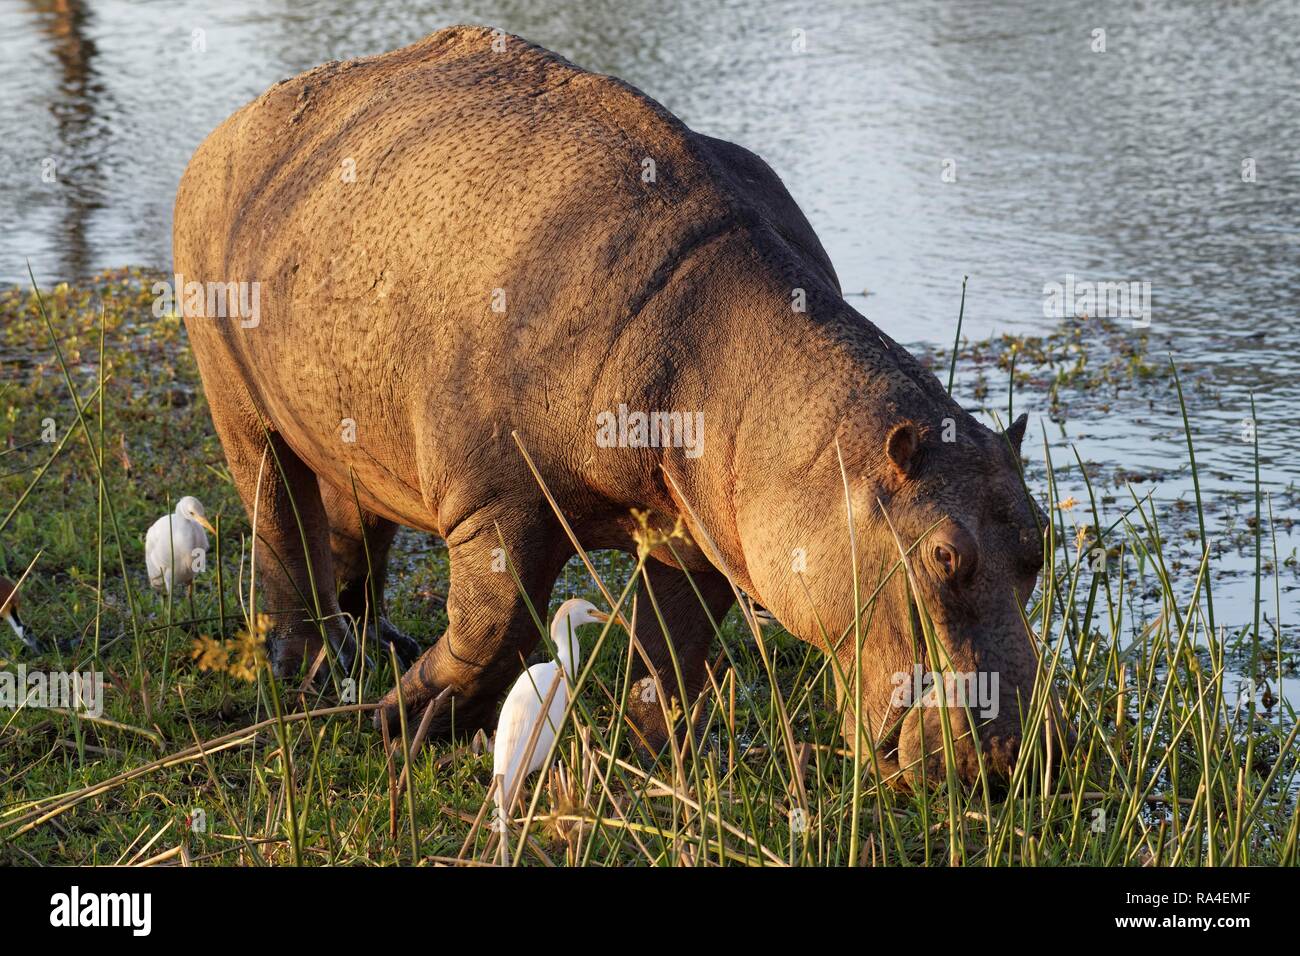 Hippopotamus (Hippopotamus amphibius), wading and grazing in the shallow water of the Sabie River, followed by two great egrets Stock Photo